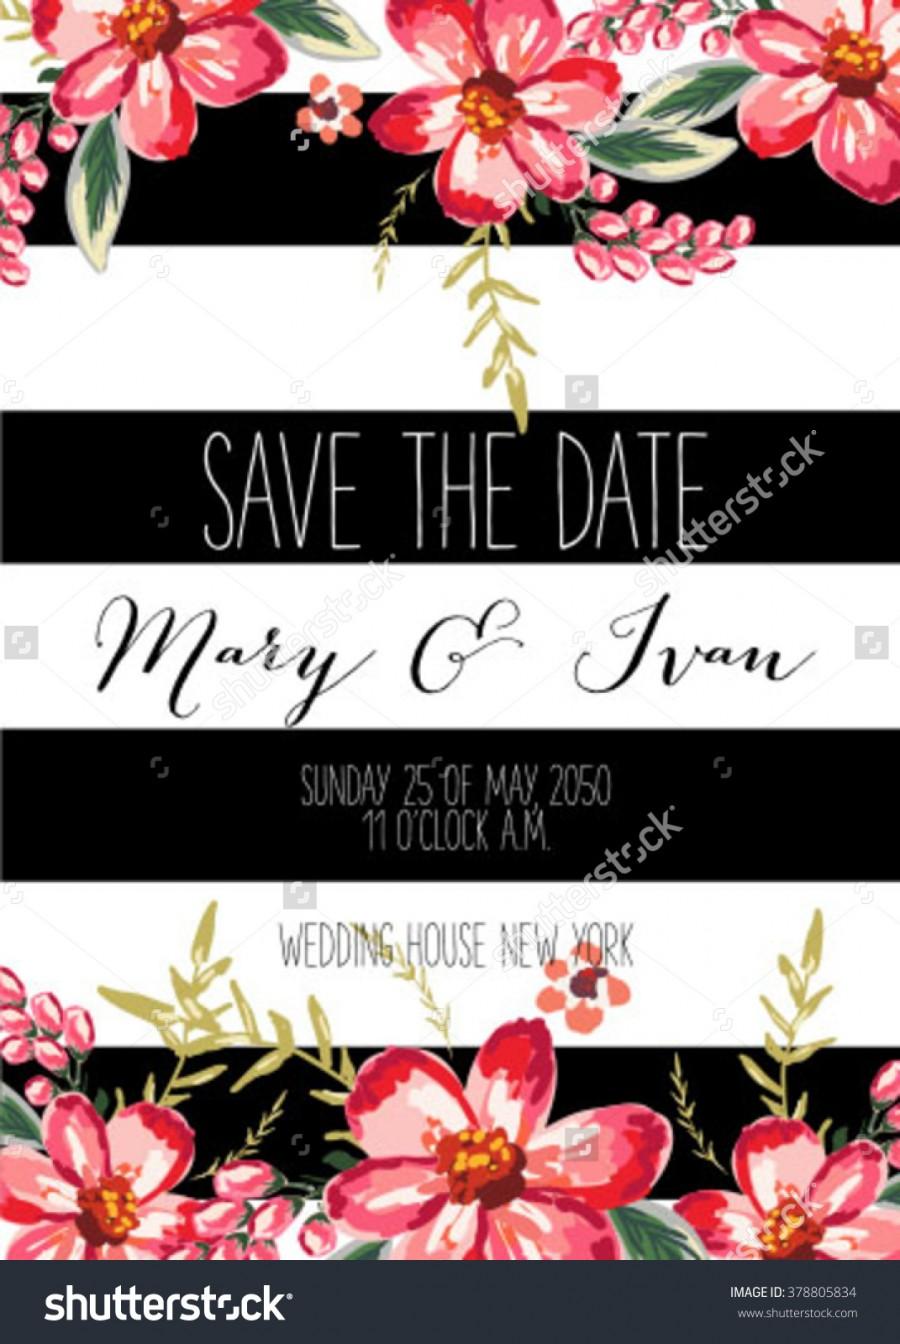 Wedding - Save the date design. Wedding invitation with flowers.